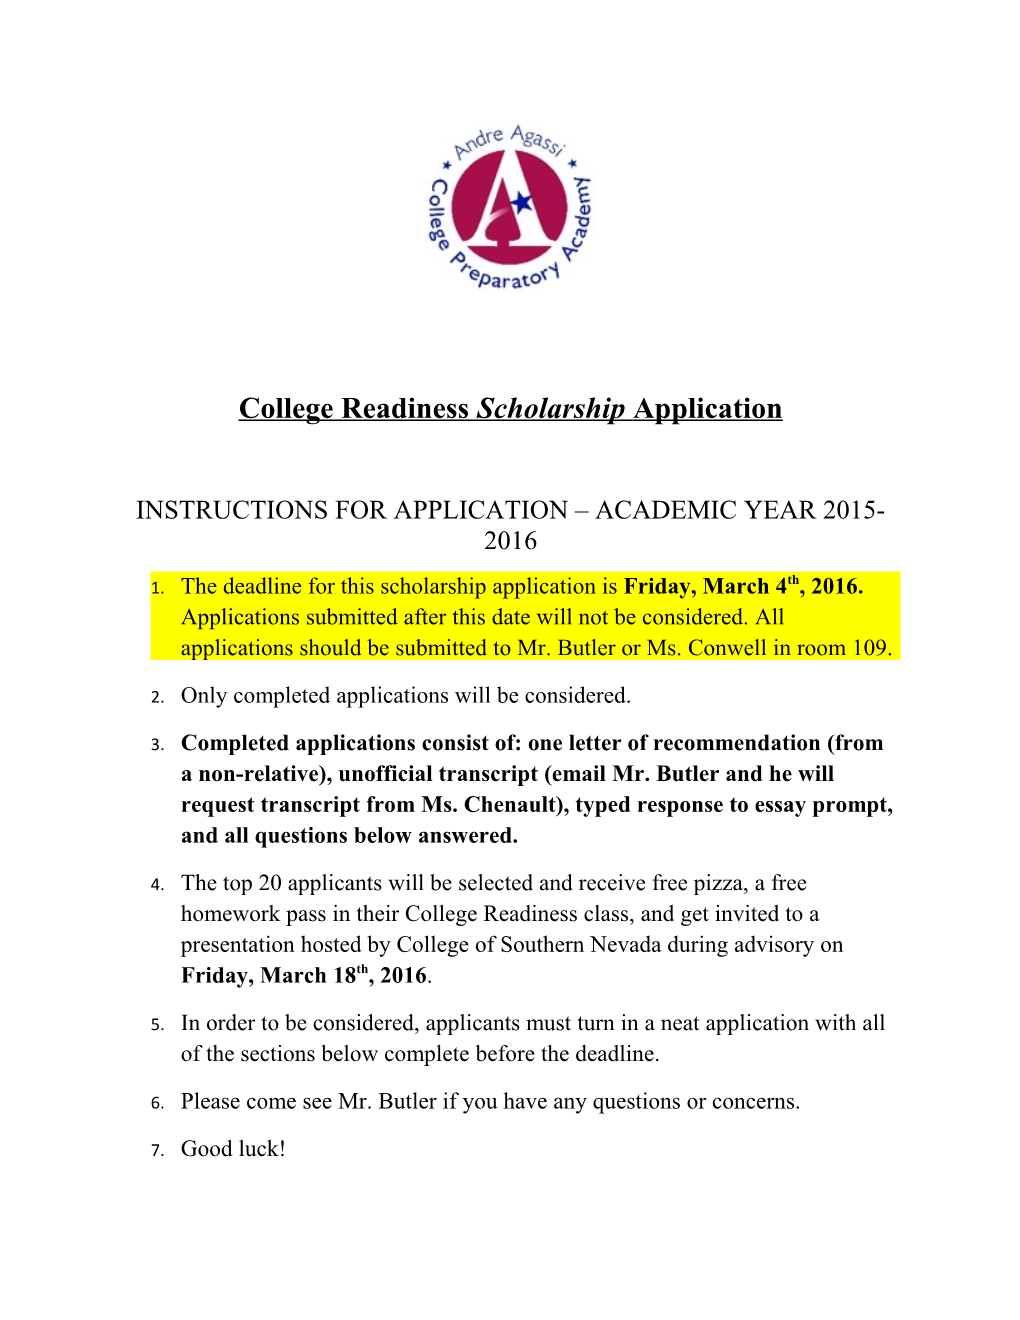 Instructions for Application Academic Year 2015-2016